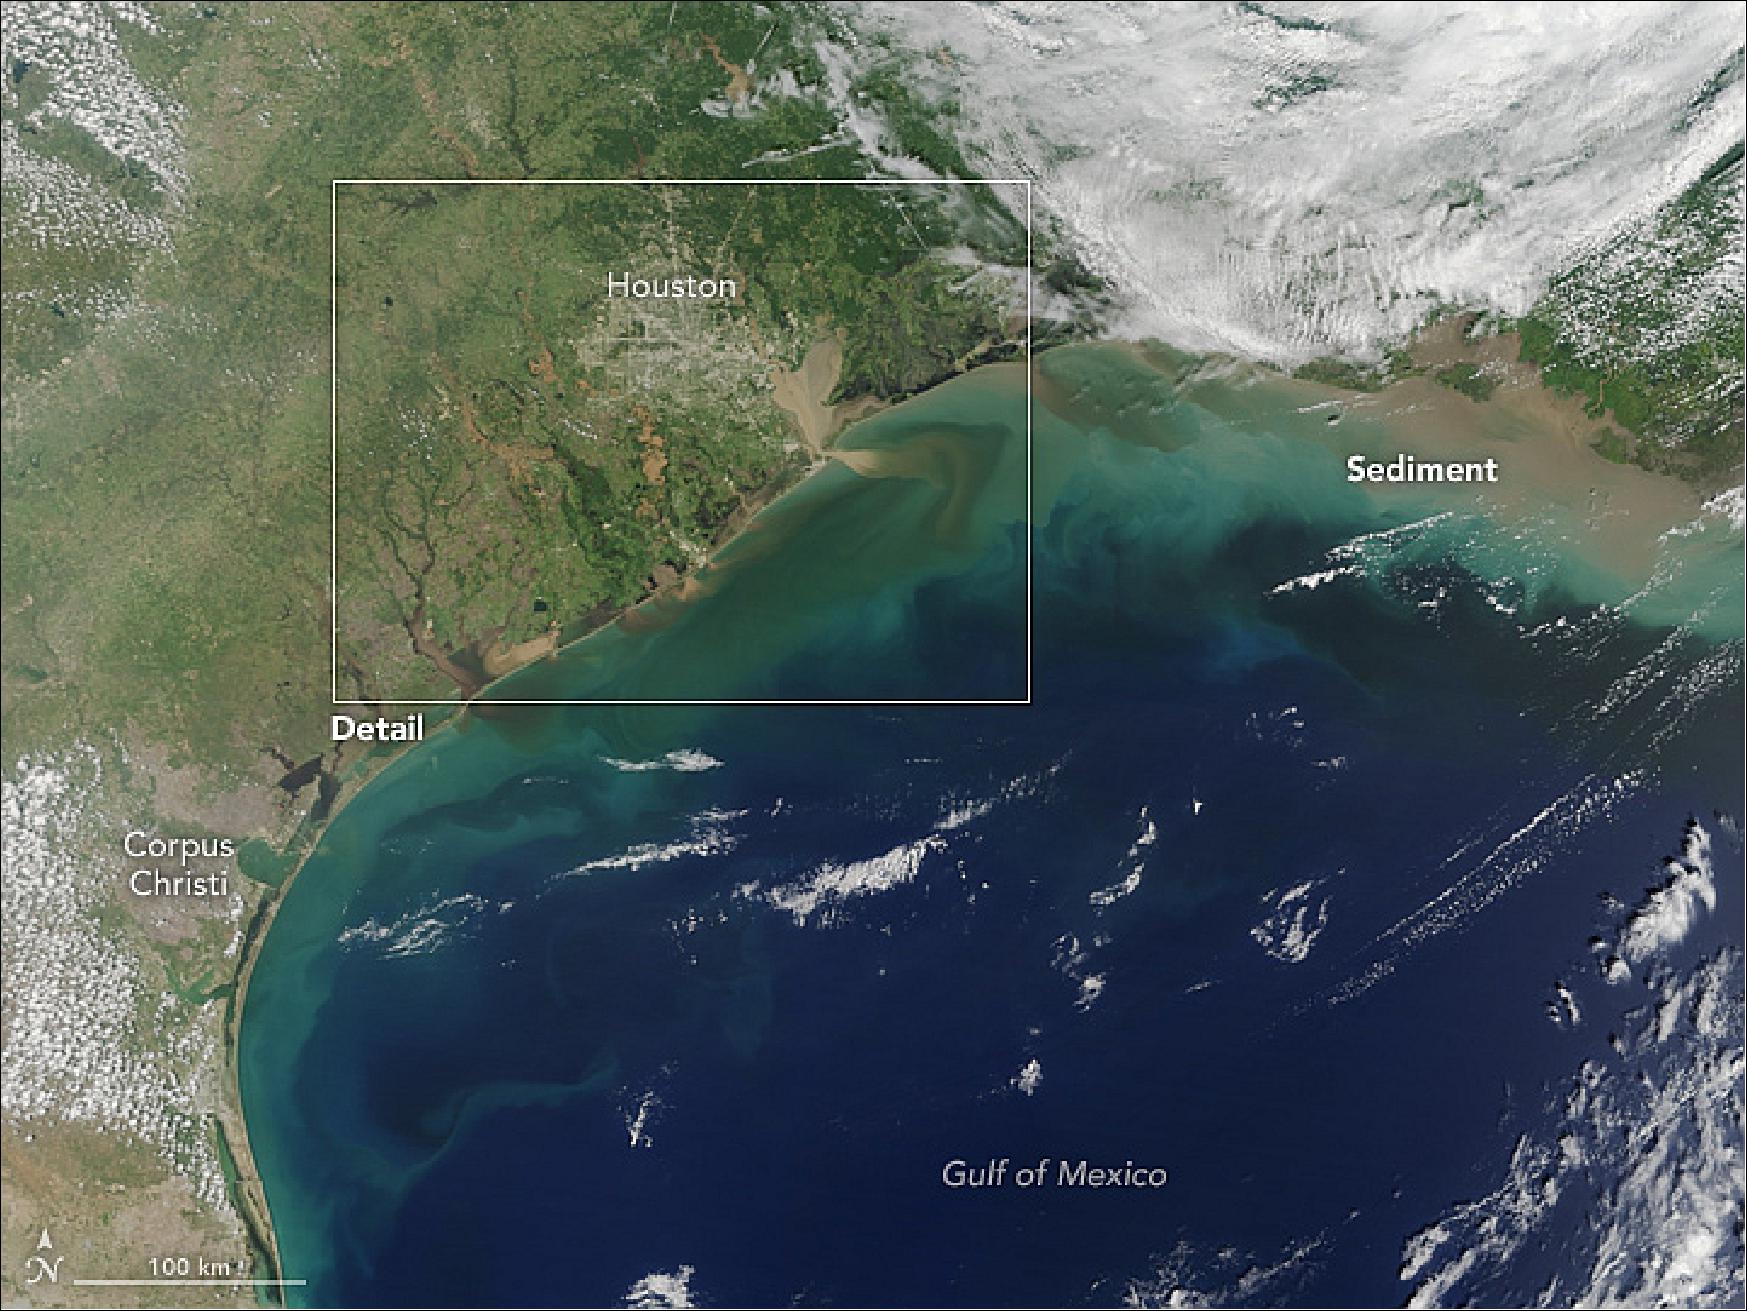 Figure 58: False-color image of MODIS, acquired on Aug. 31, 2017, showing extensive flooding along the Texas coast and around the Houston metropolitan area in the aftermath of Hurricane Harvey (image credit: NASA Earth Observatory, images by Jesse Allen, using data from LANCE (Land Atmosphere Near real-time Capability for EOS), Story by Mike Carlowicz)